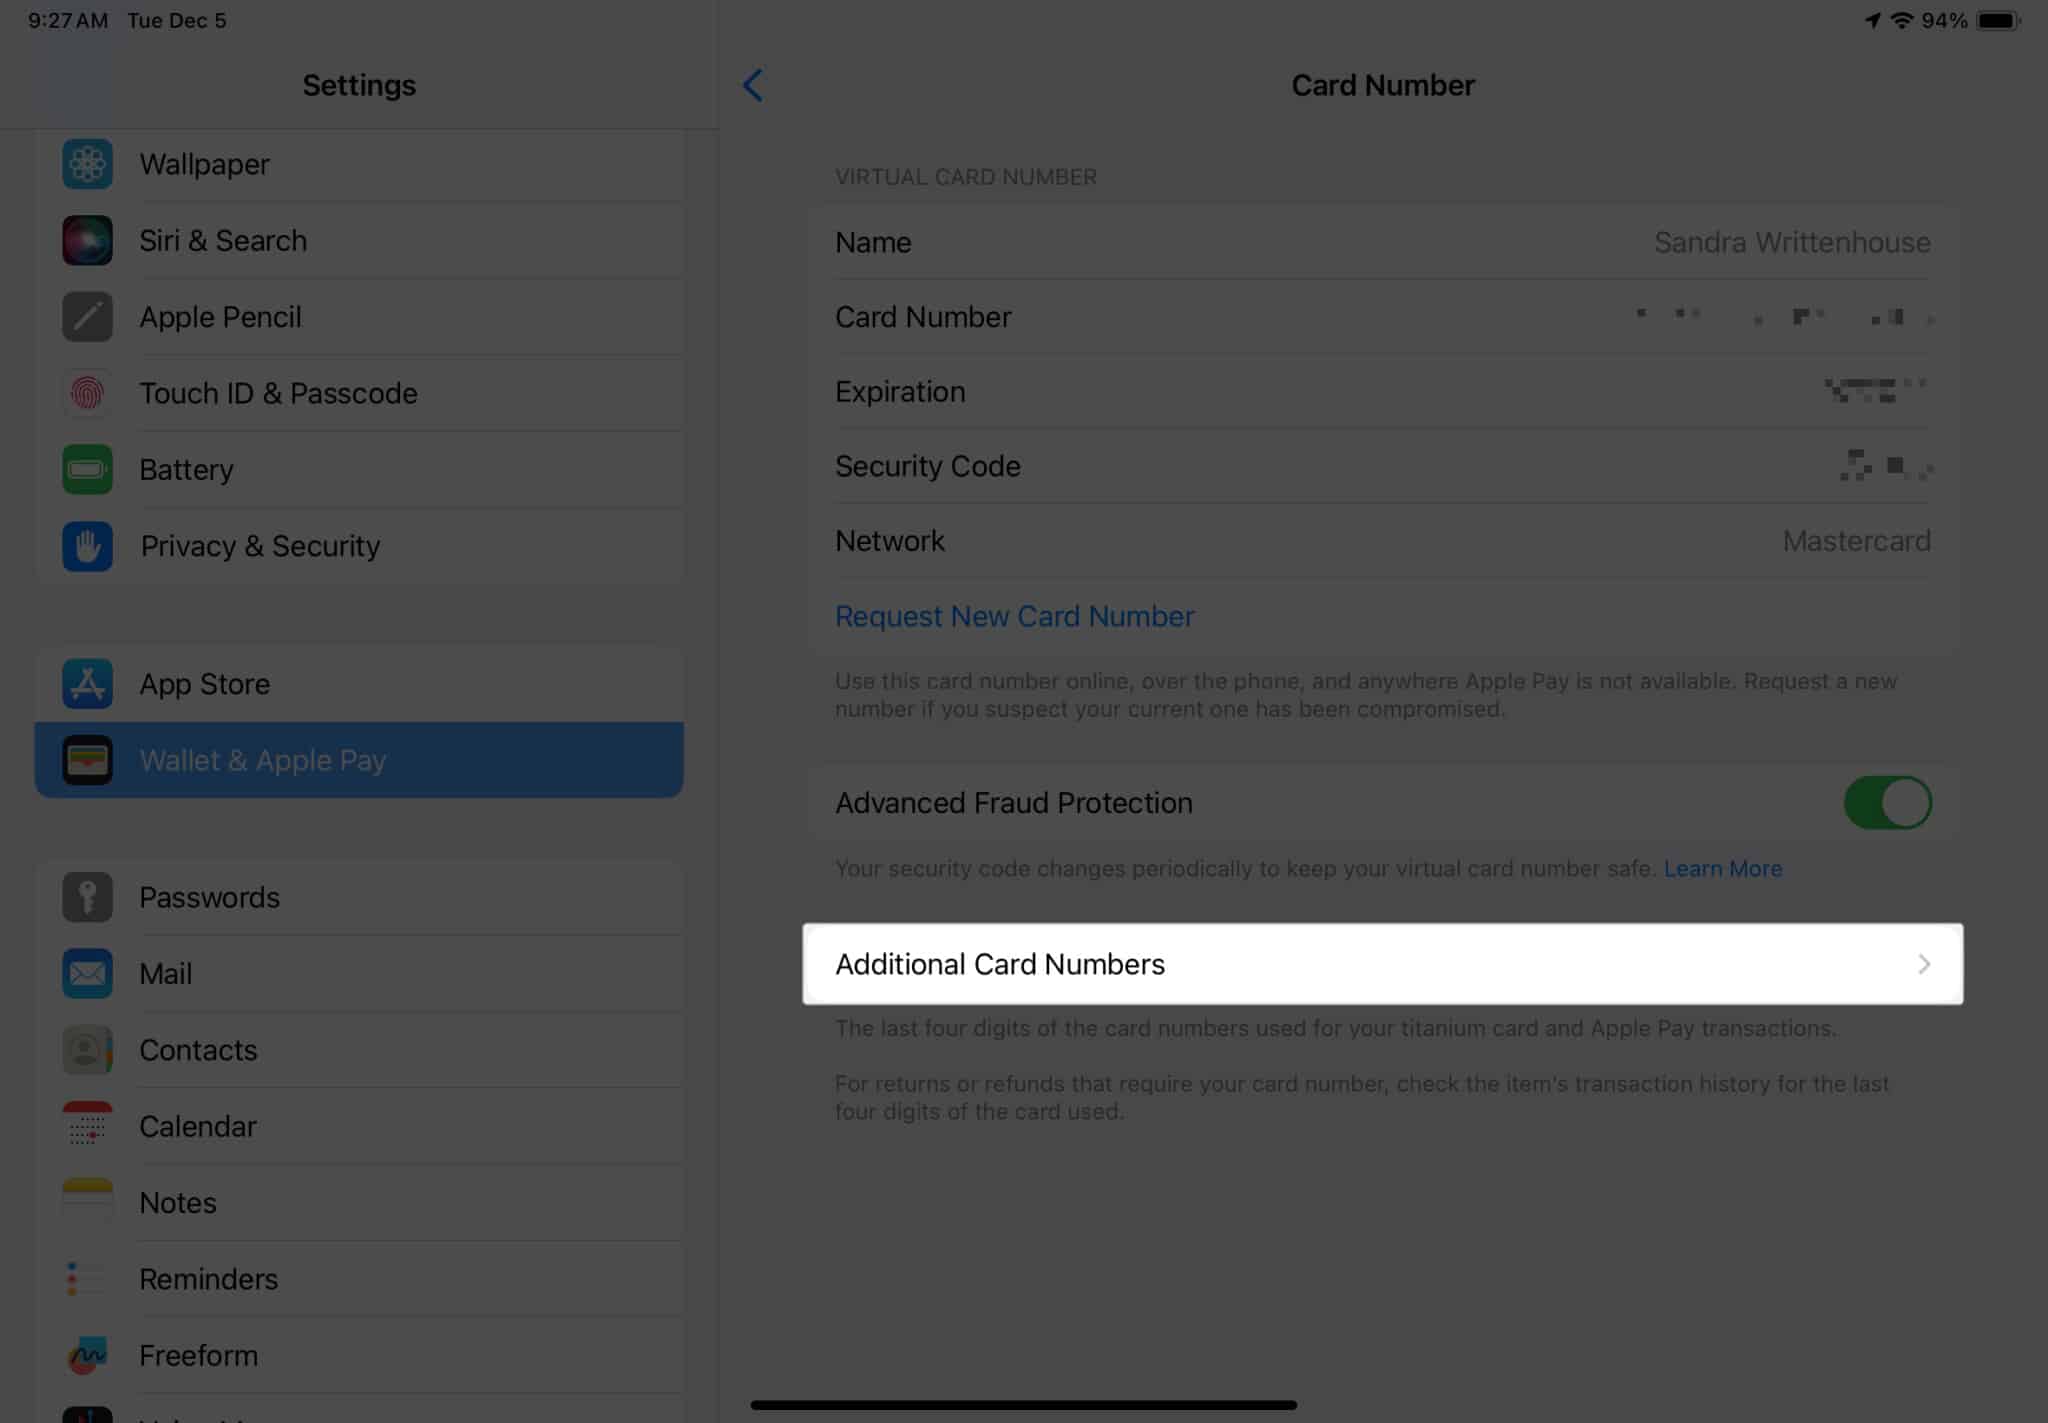 Select Additional Card Numbers option